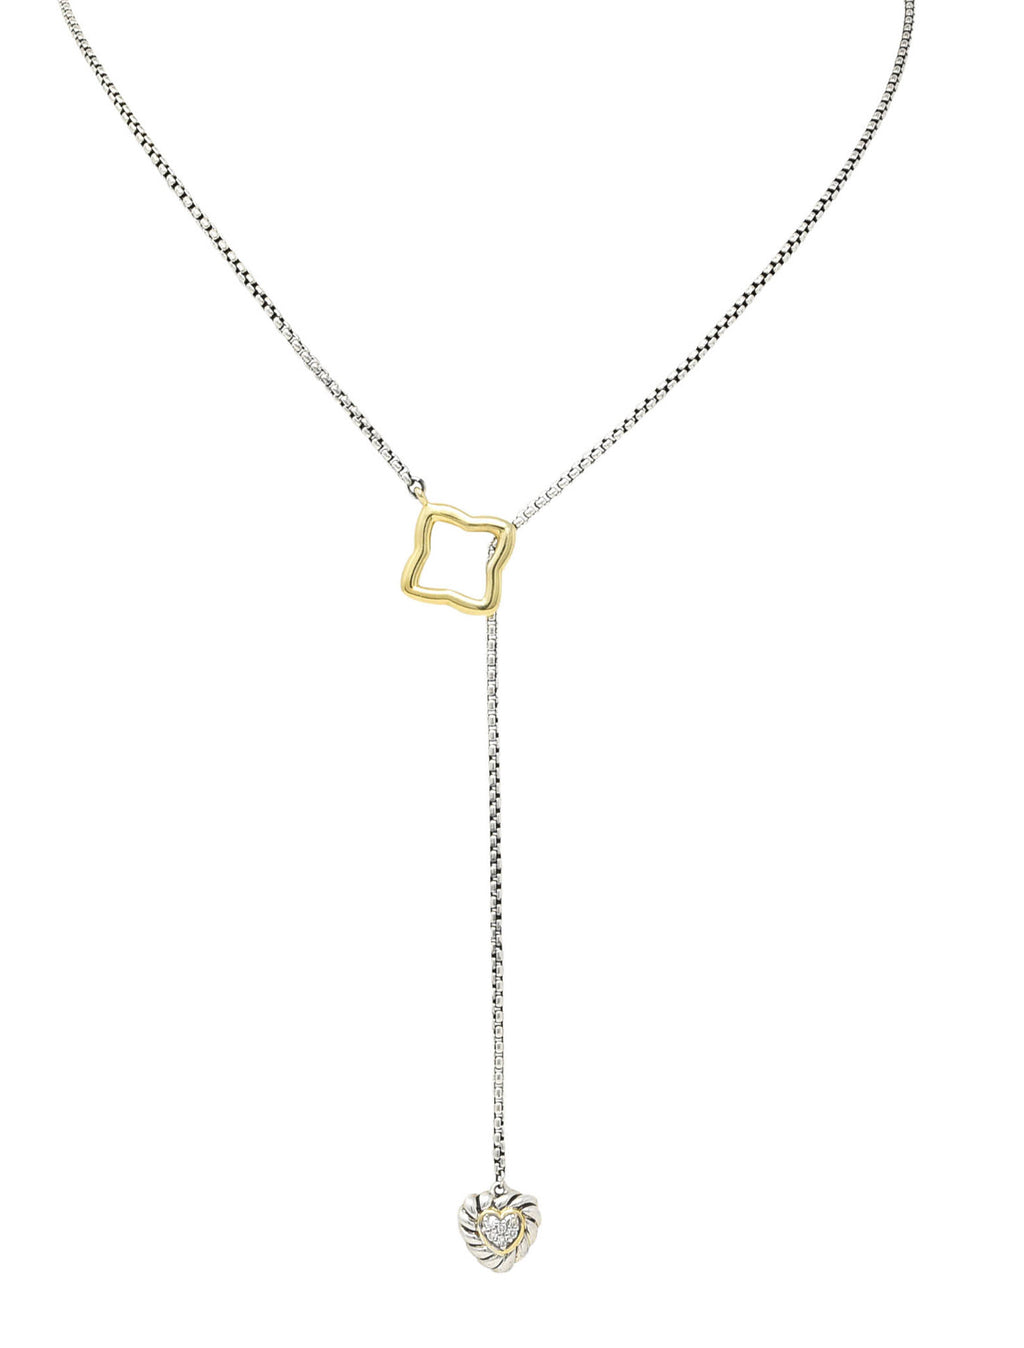 Colour Blossom Lariat Necklace, Yellow Gold, Onyx And Diamond - Categories